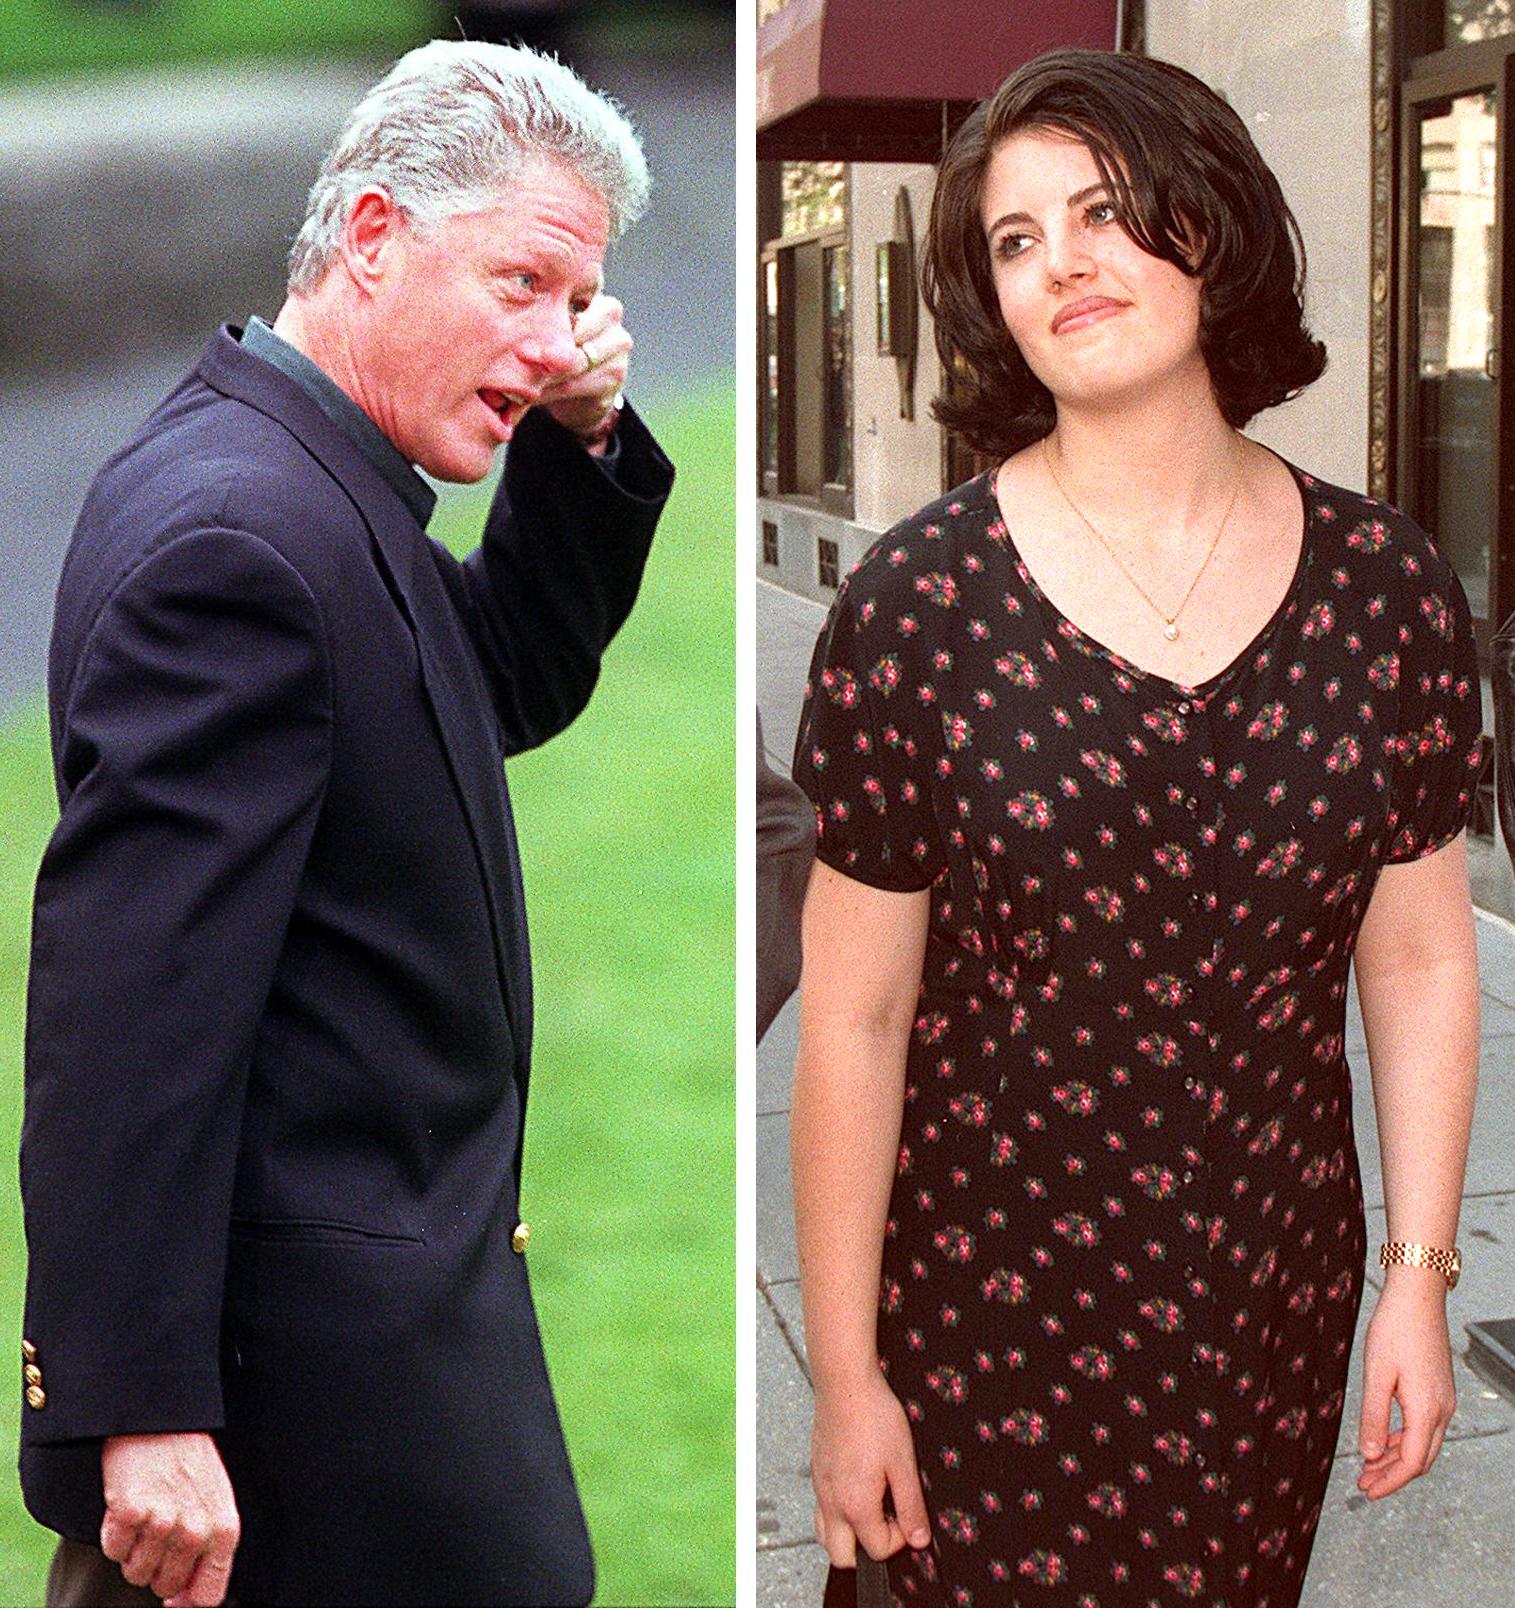 A side-by-side photo of Bill Clinton and Monica Lewinsky dated August 14, 1998 | Source: Getty Images